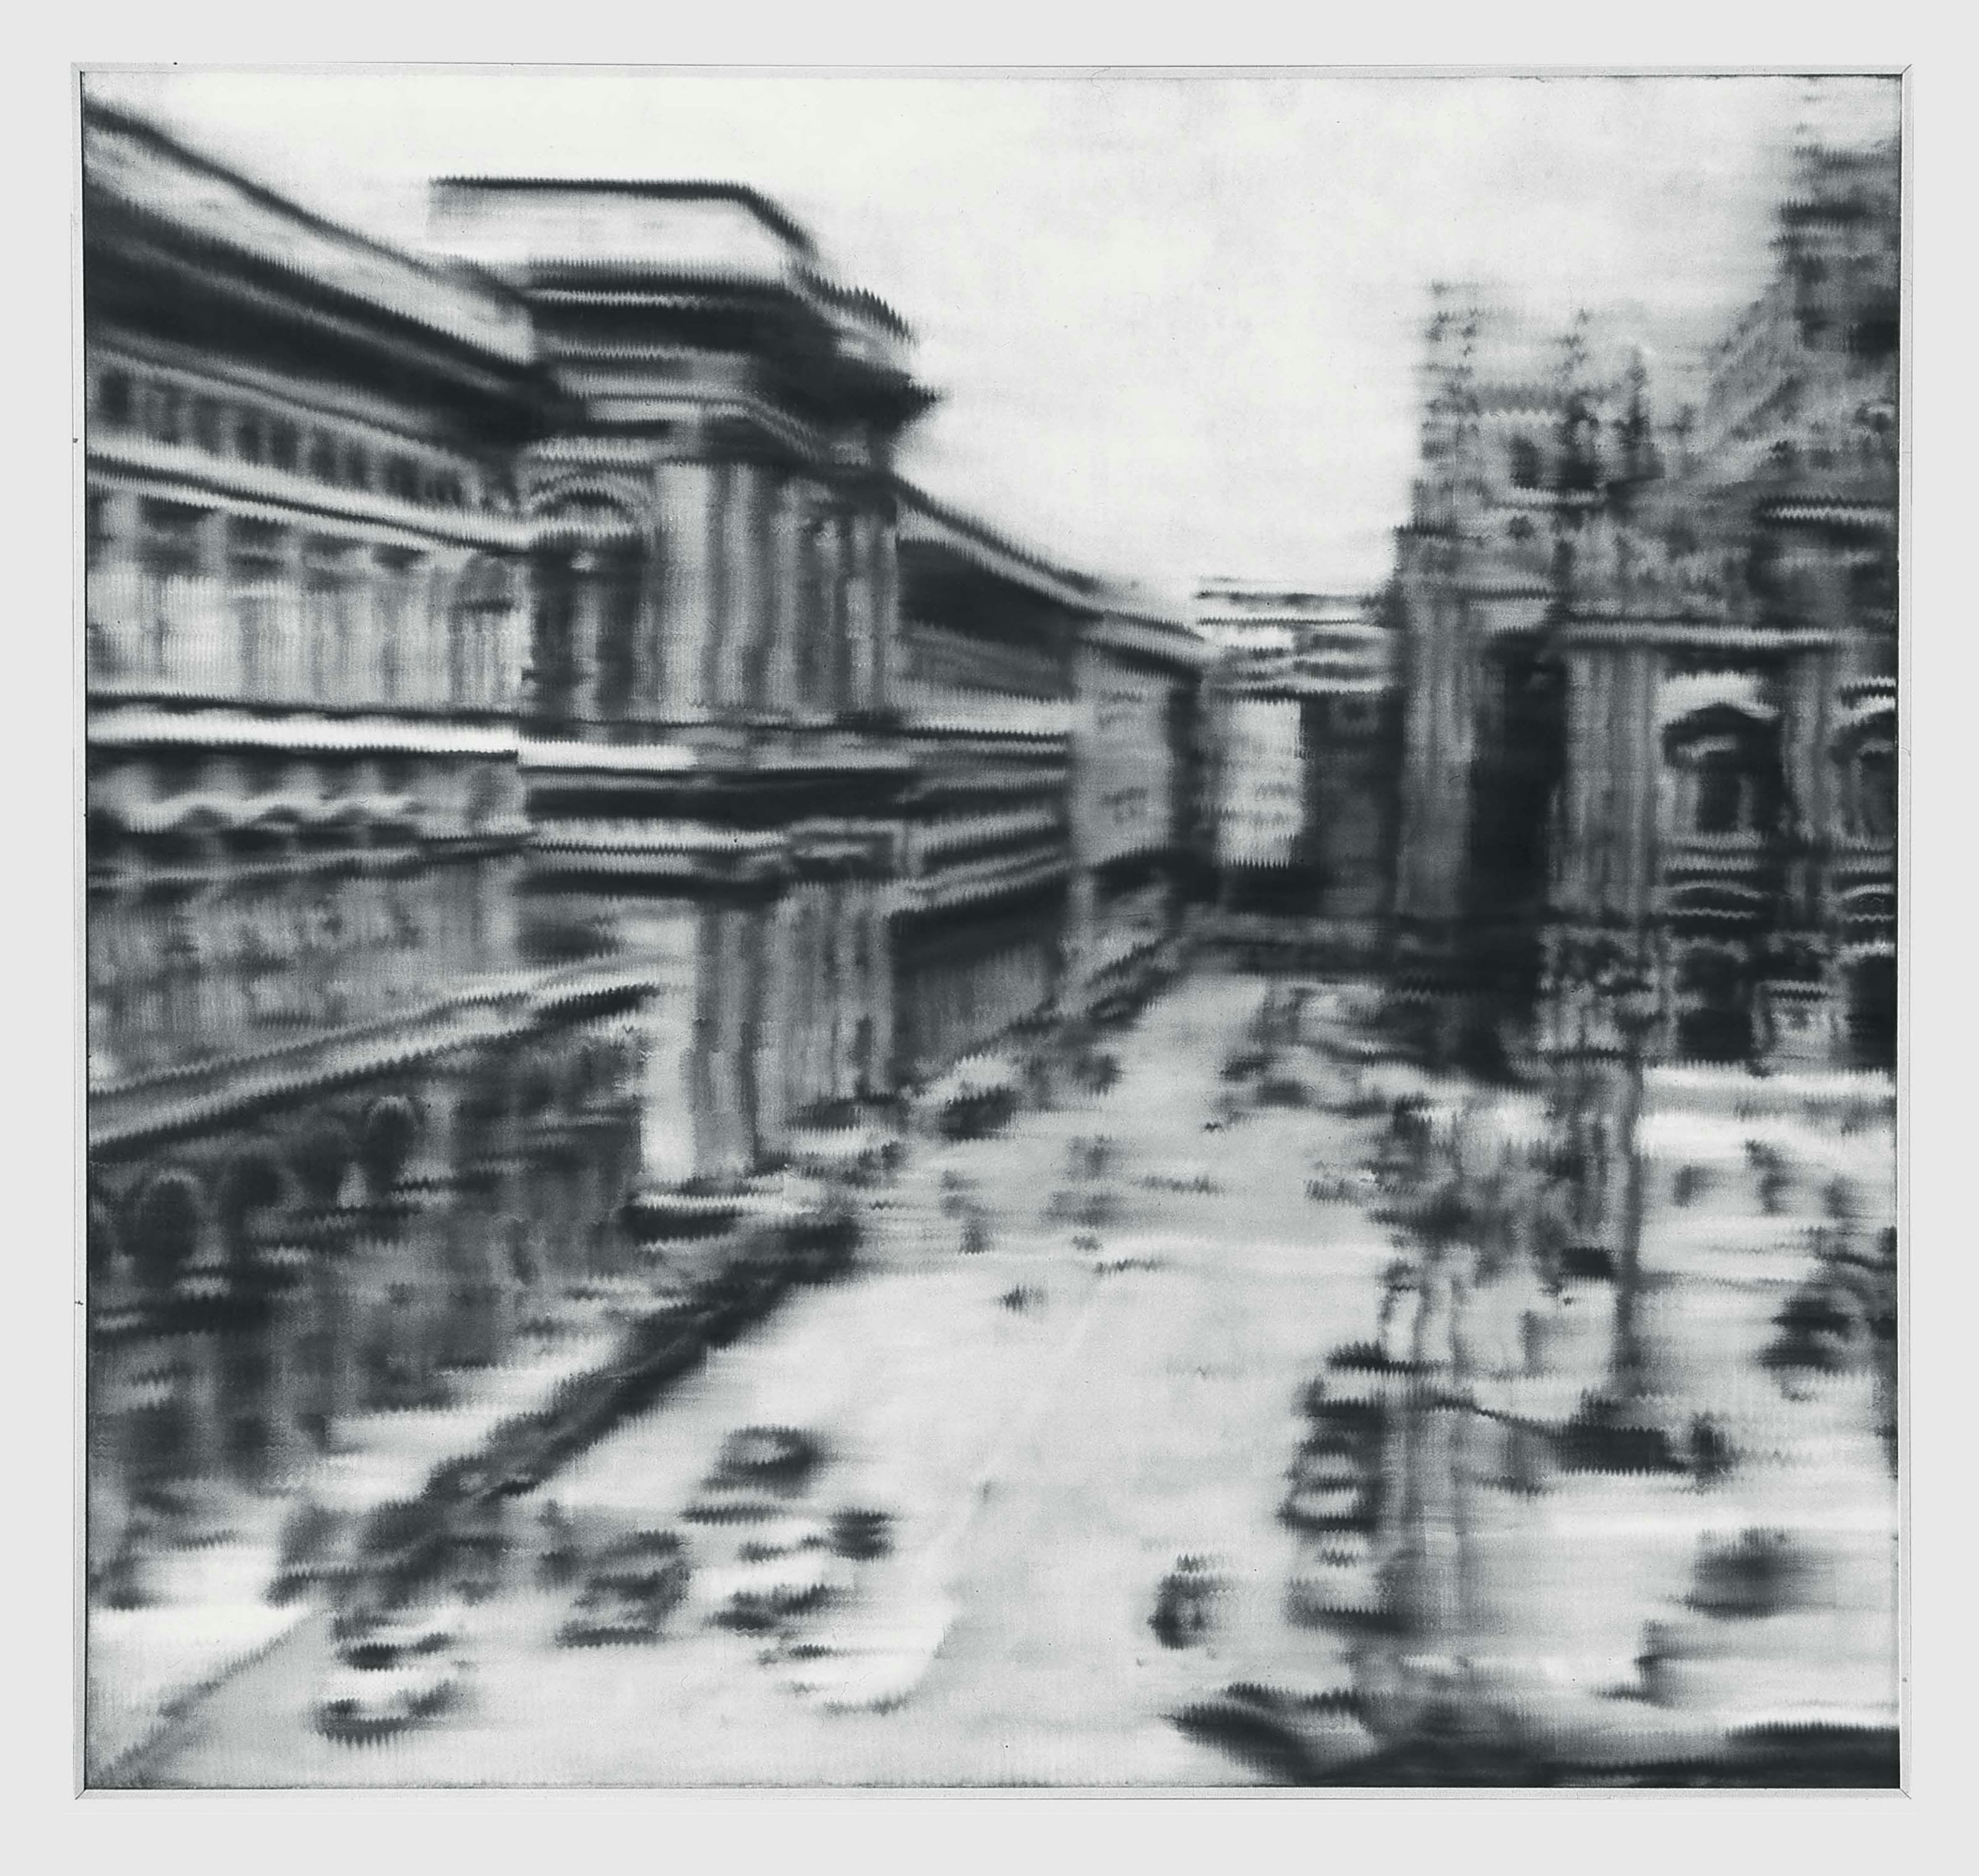 A painting by Gerhard Richter, titled Domplatz, Mailand (Cathedral Square, Milan), dated 1968.